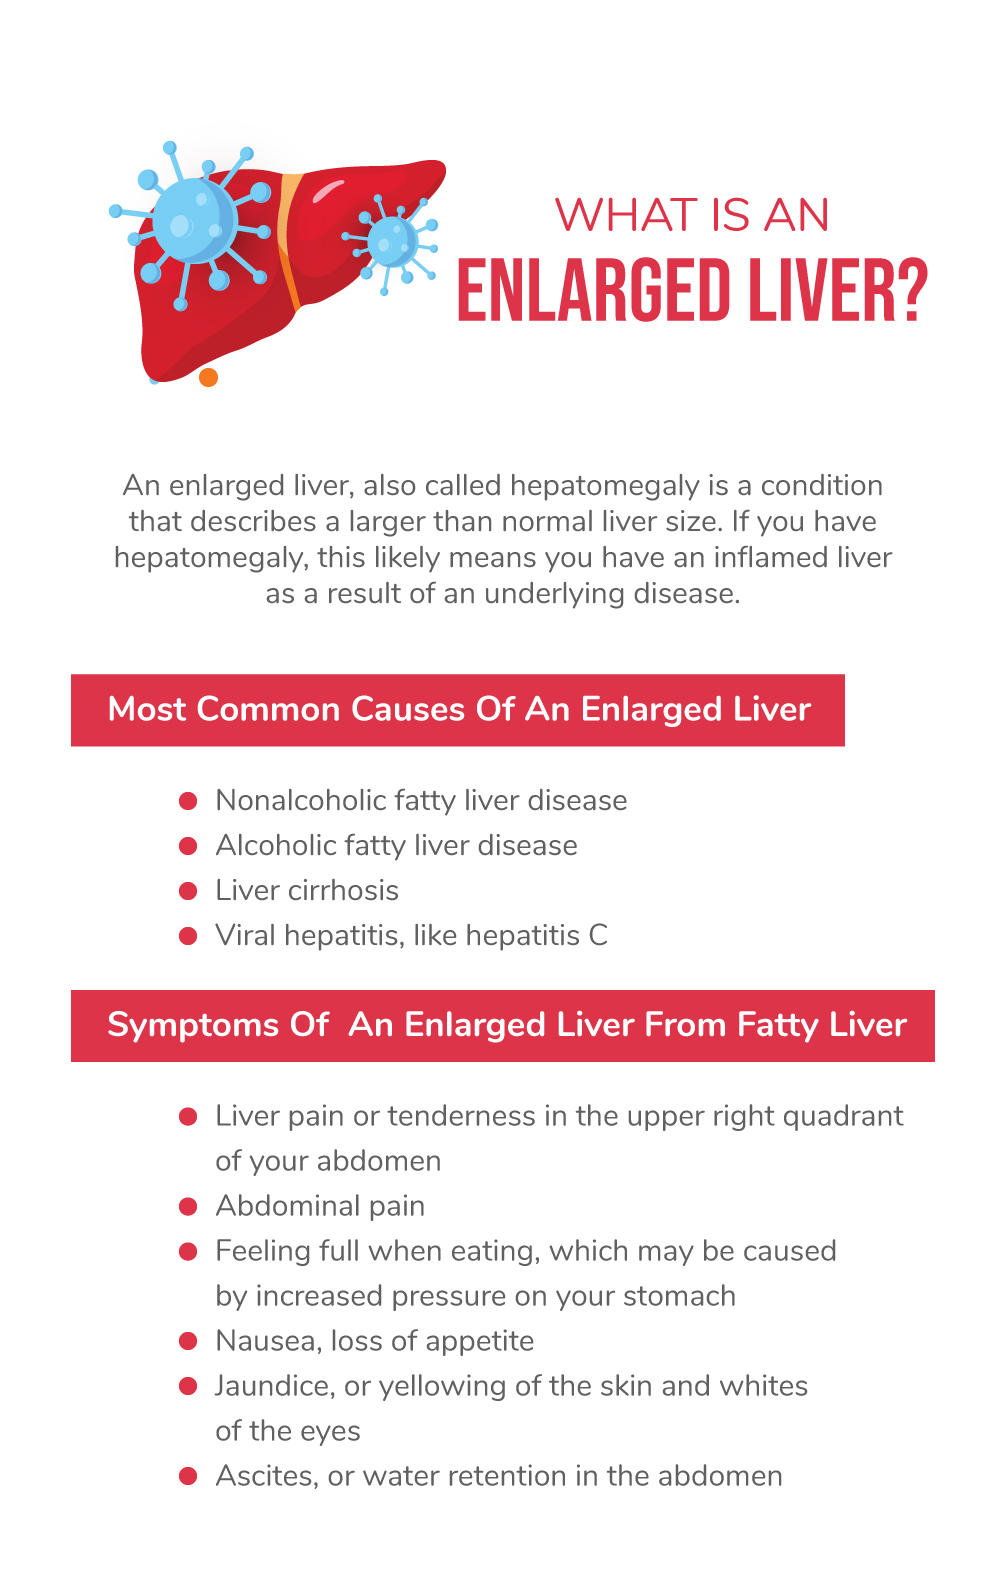 What Is An Enlarged Liver?